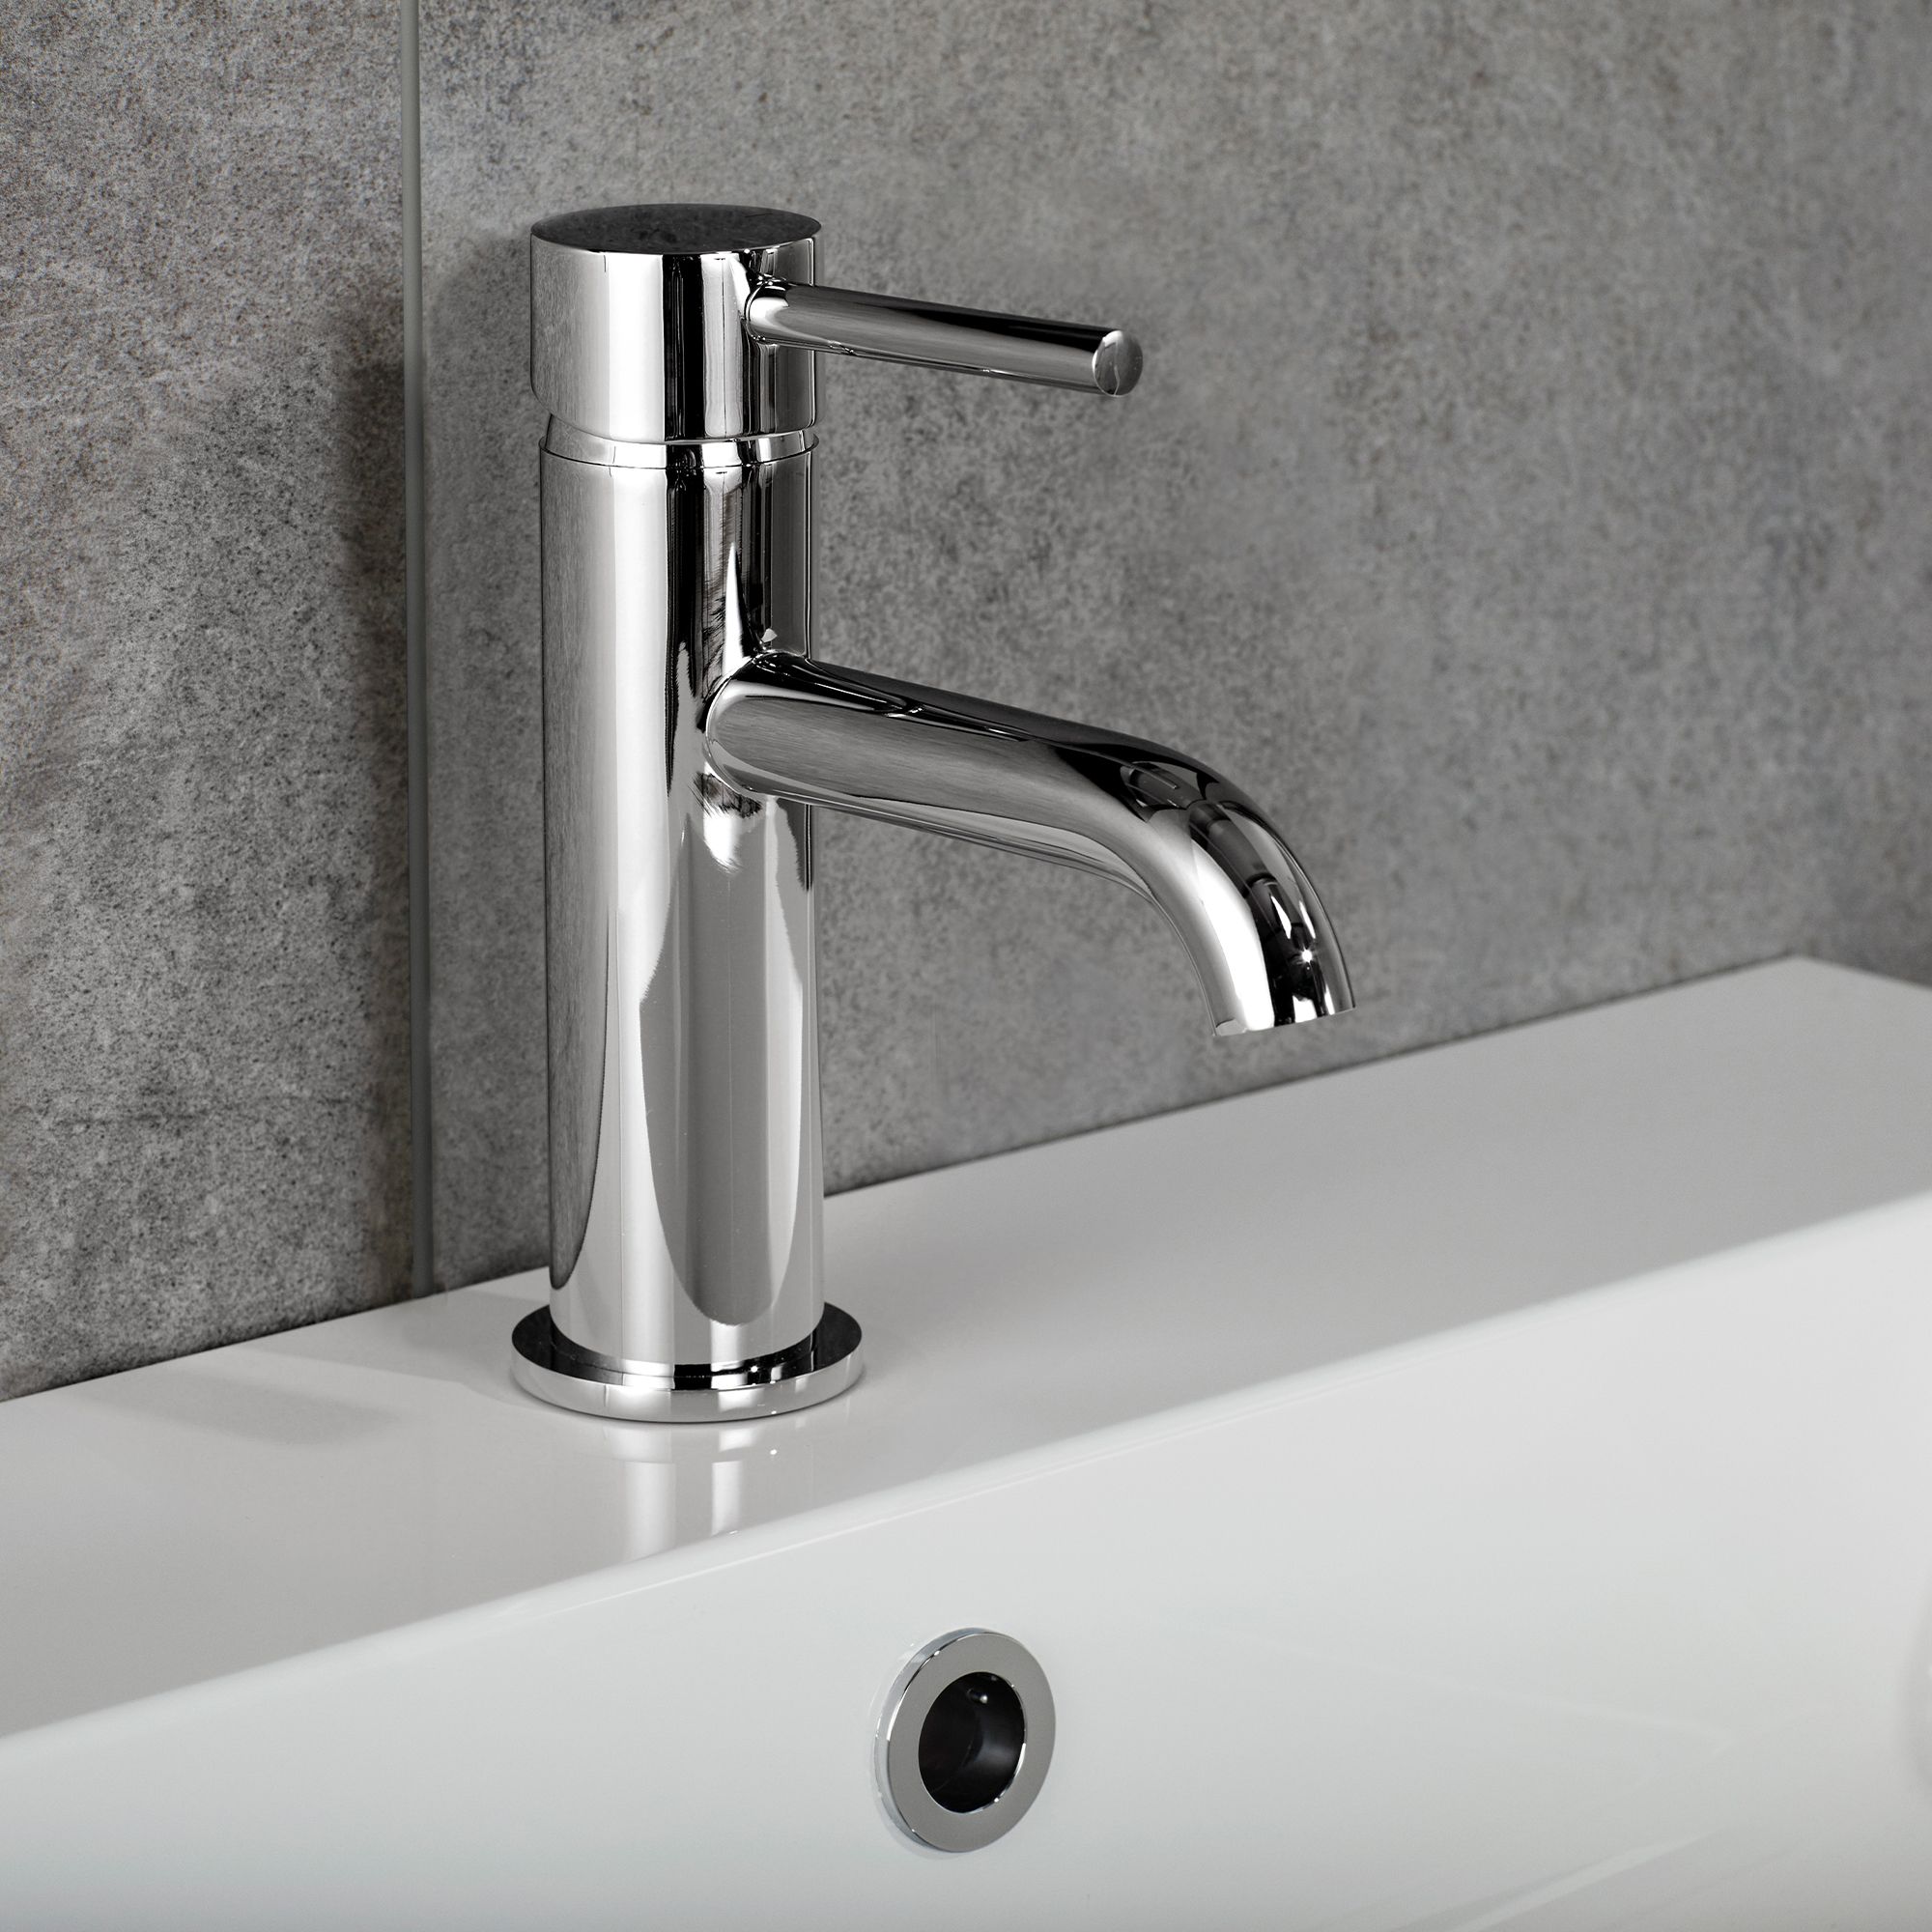 Aquadry Oria Small tall Gloss Chrome effect Deck-mounted Thermostatic Sink Mono mixer Tap